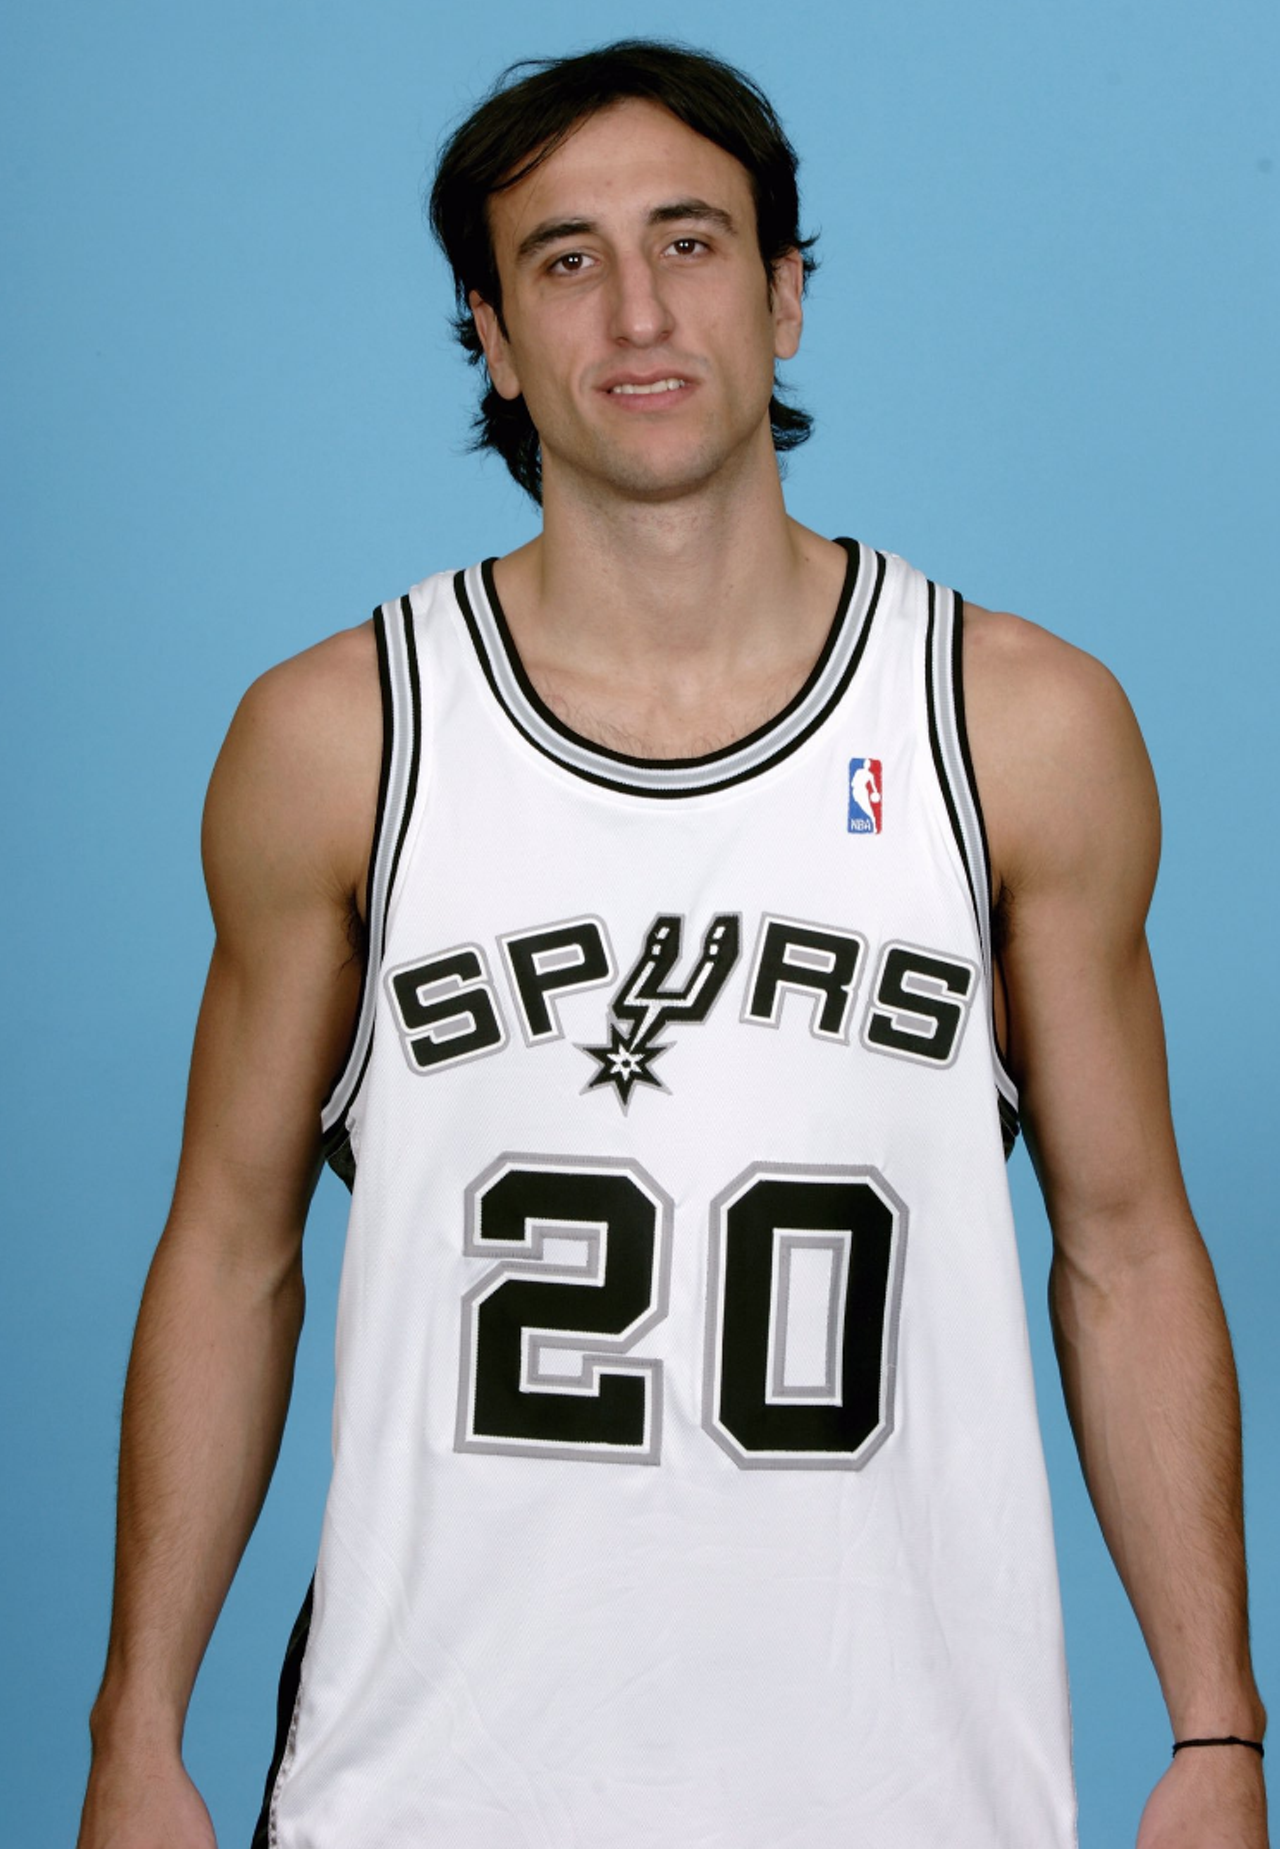 The fact that he had the amazing career he did despite being a late second round pick in the NBA draft
Back in 1999 Ginobili was the 57th pick in the NBA draft, meaning he was in the second round. Some players selected in the second round don’t even get signed to a rookie deal, so the fact that Ginobili was able to sign with the Spurs and become a legend is extremely rare.
Photo via Twitter / All Sport News